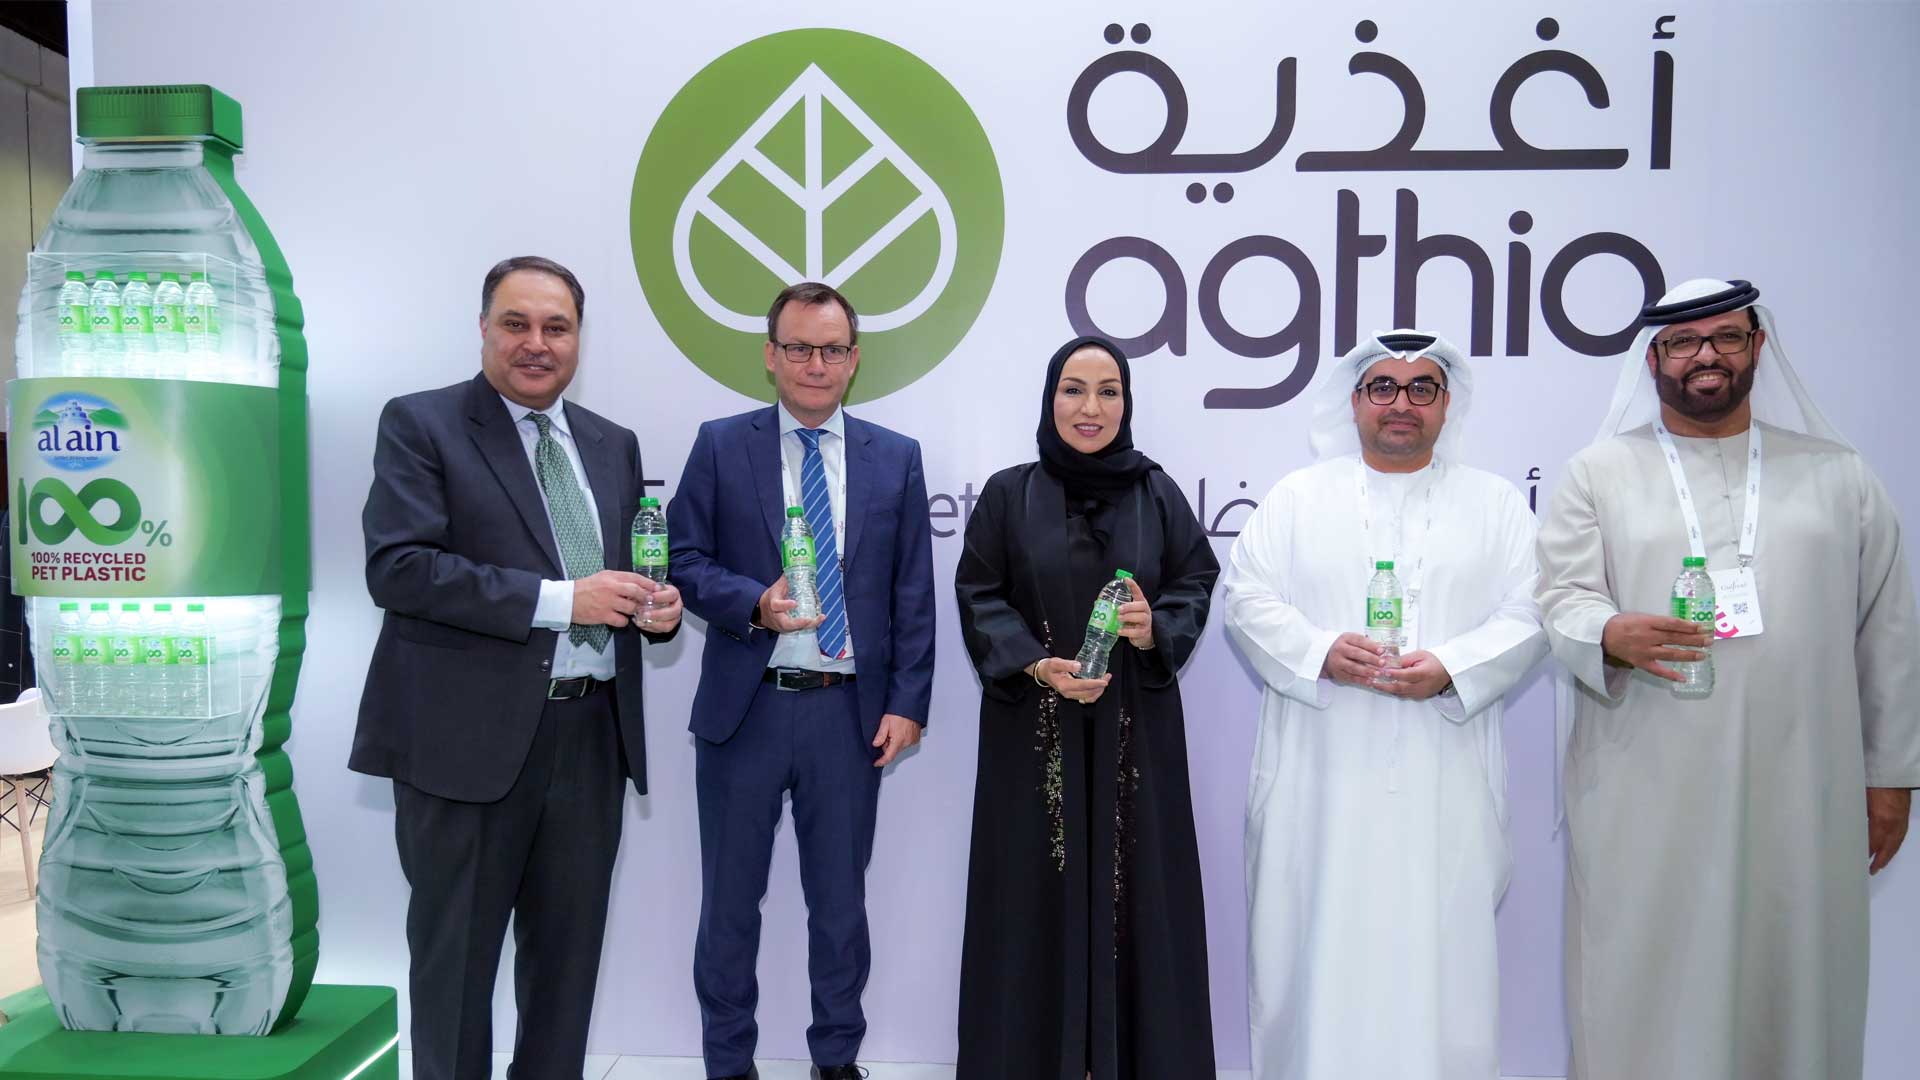 Agthia’s Al Ain Water launched UAE’s first locally produced 100% recycled PET bottles